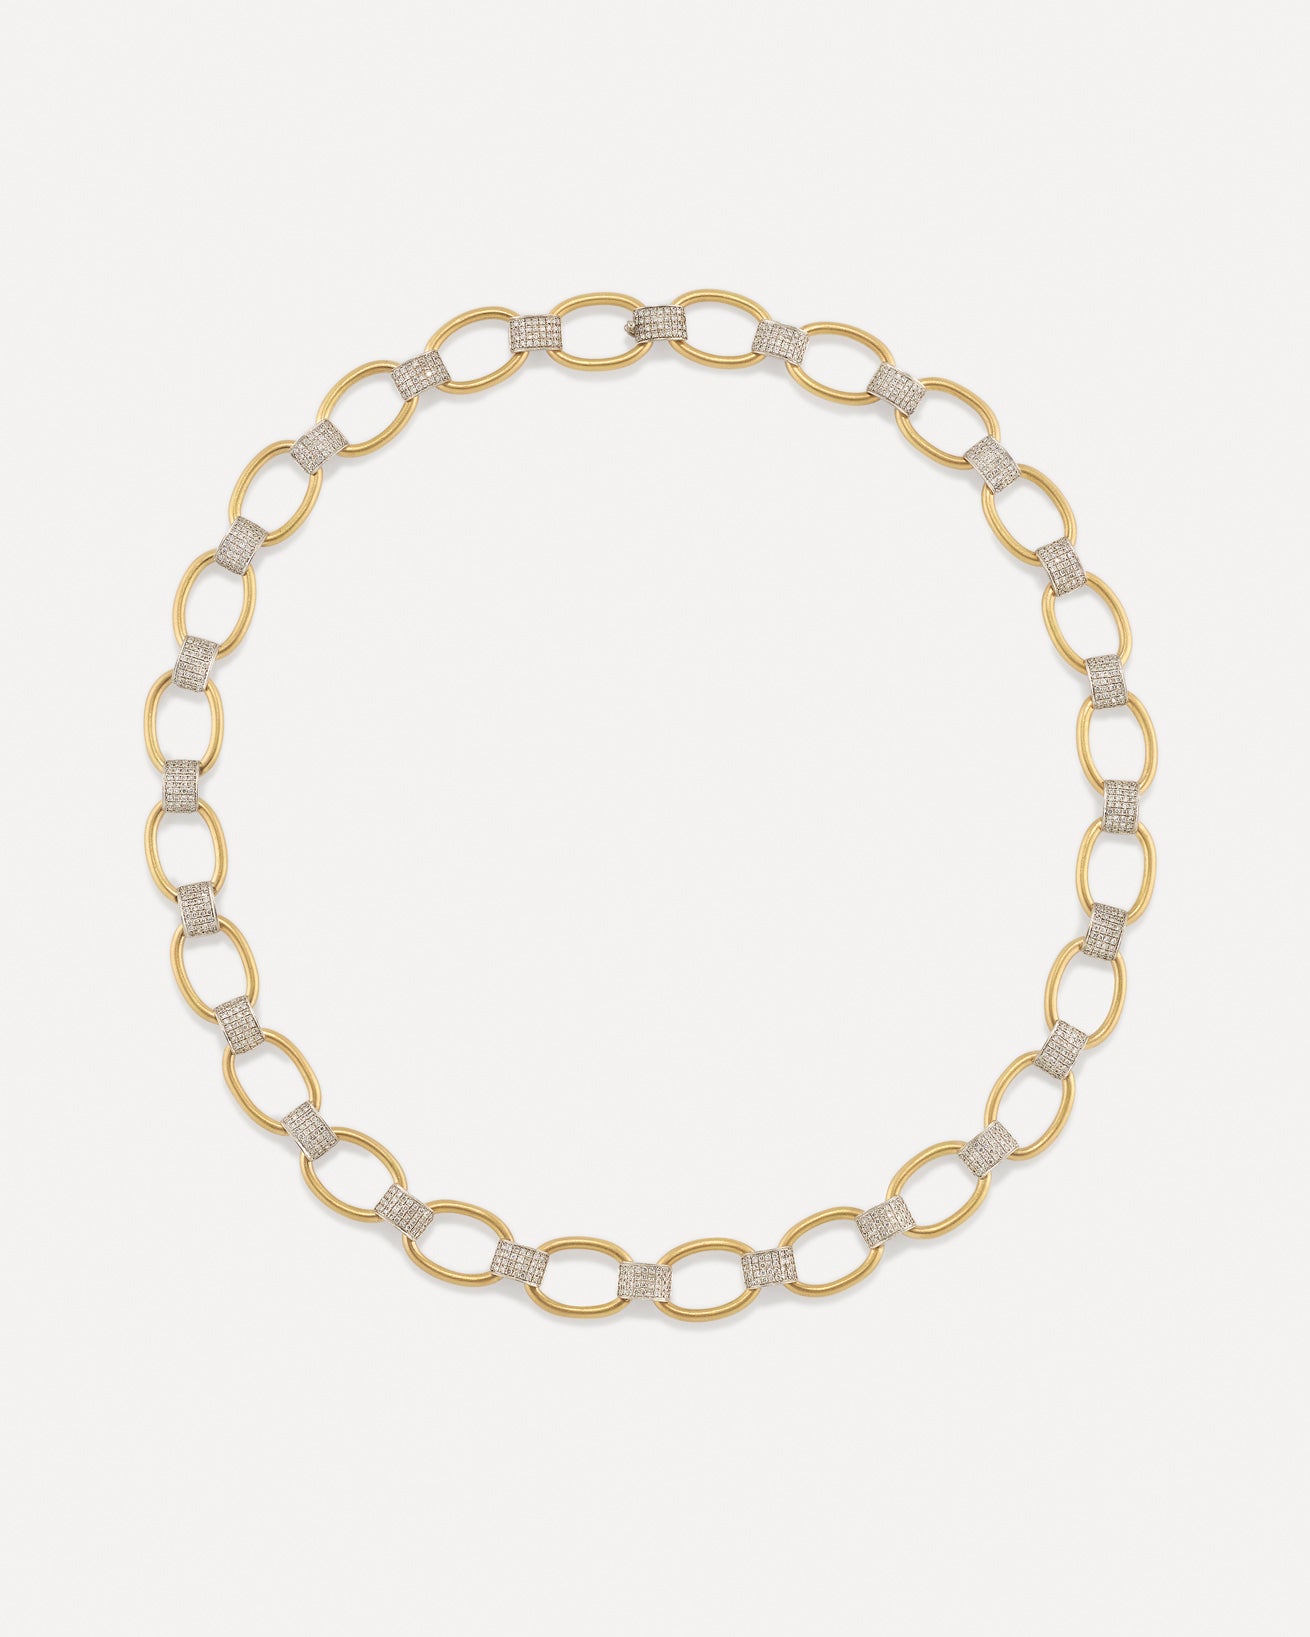 8mm cuban links necklace chain in white and blue – Bijouterie Gonin